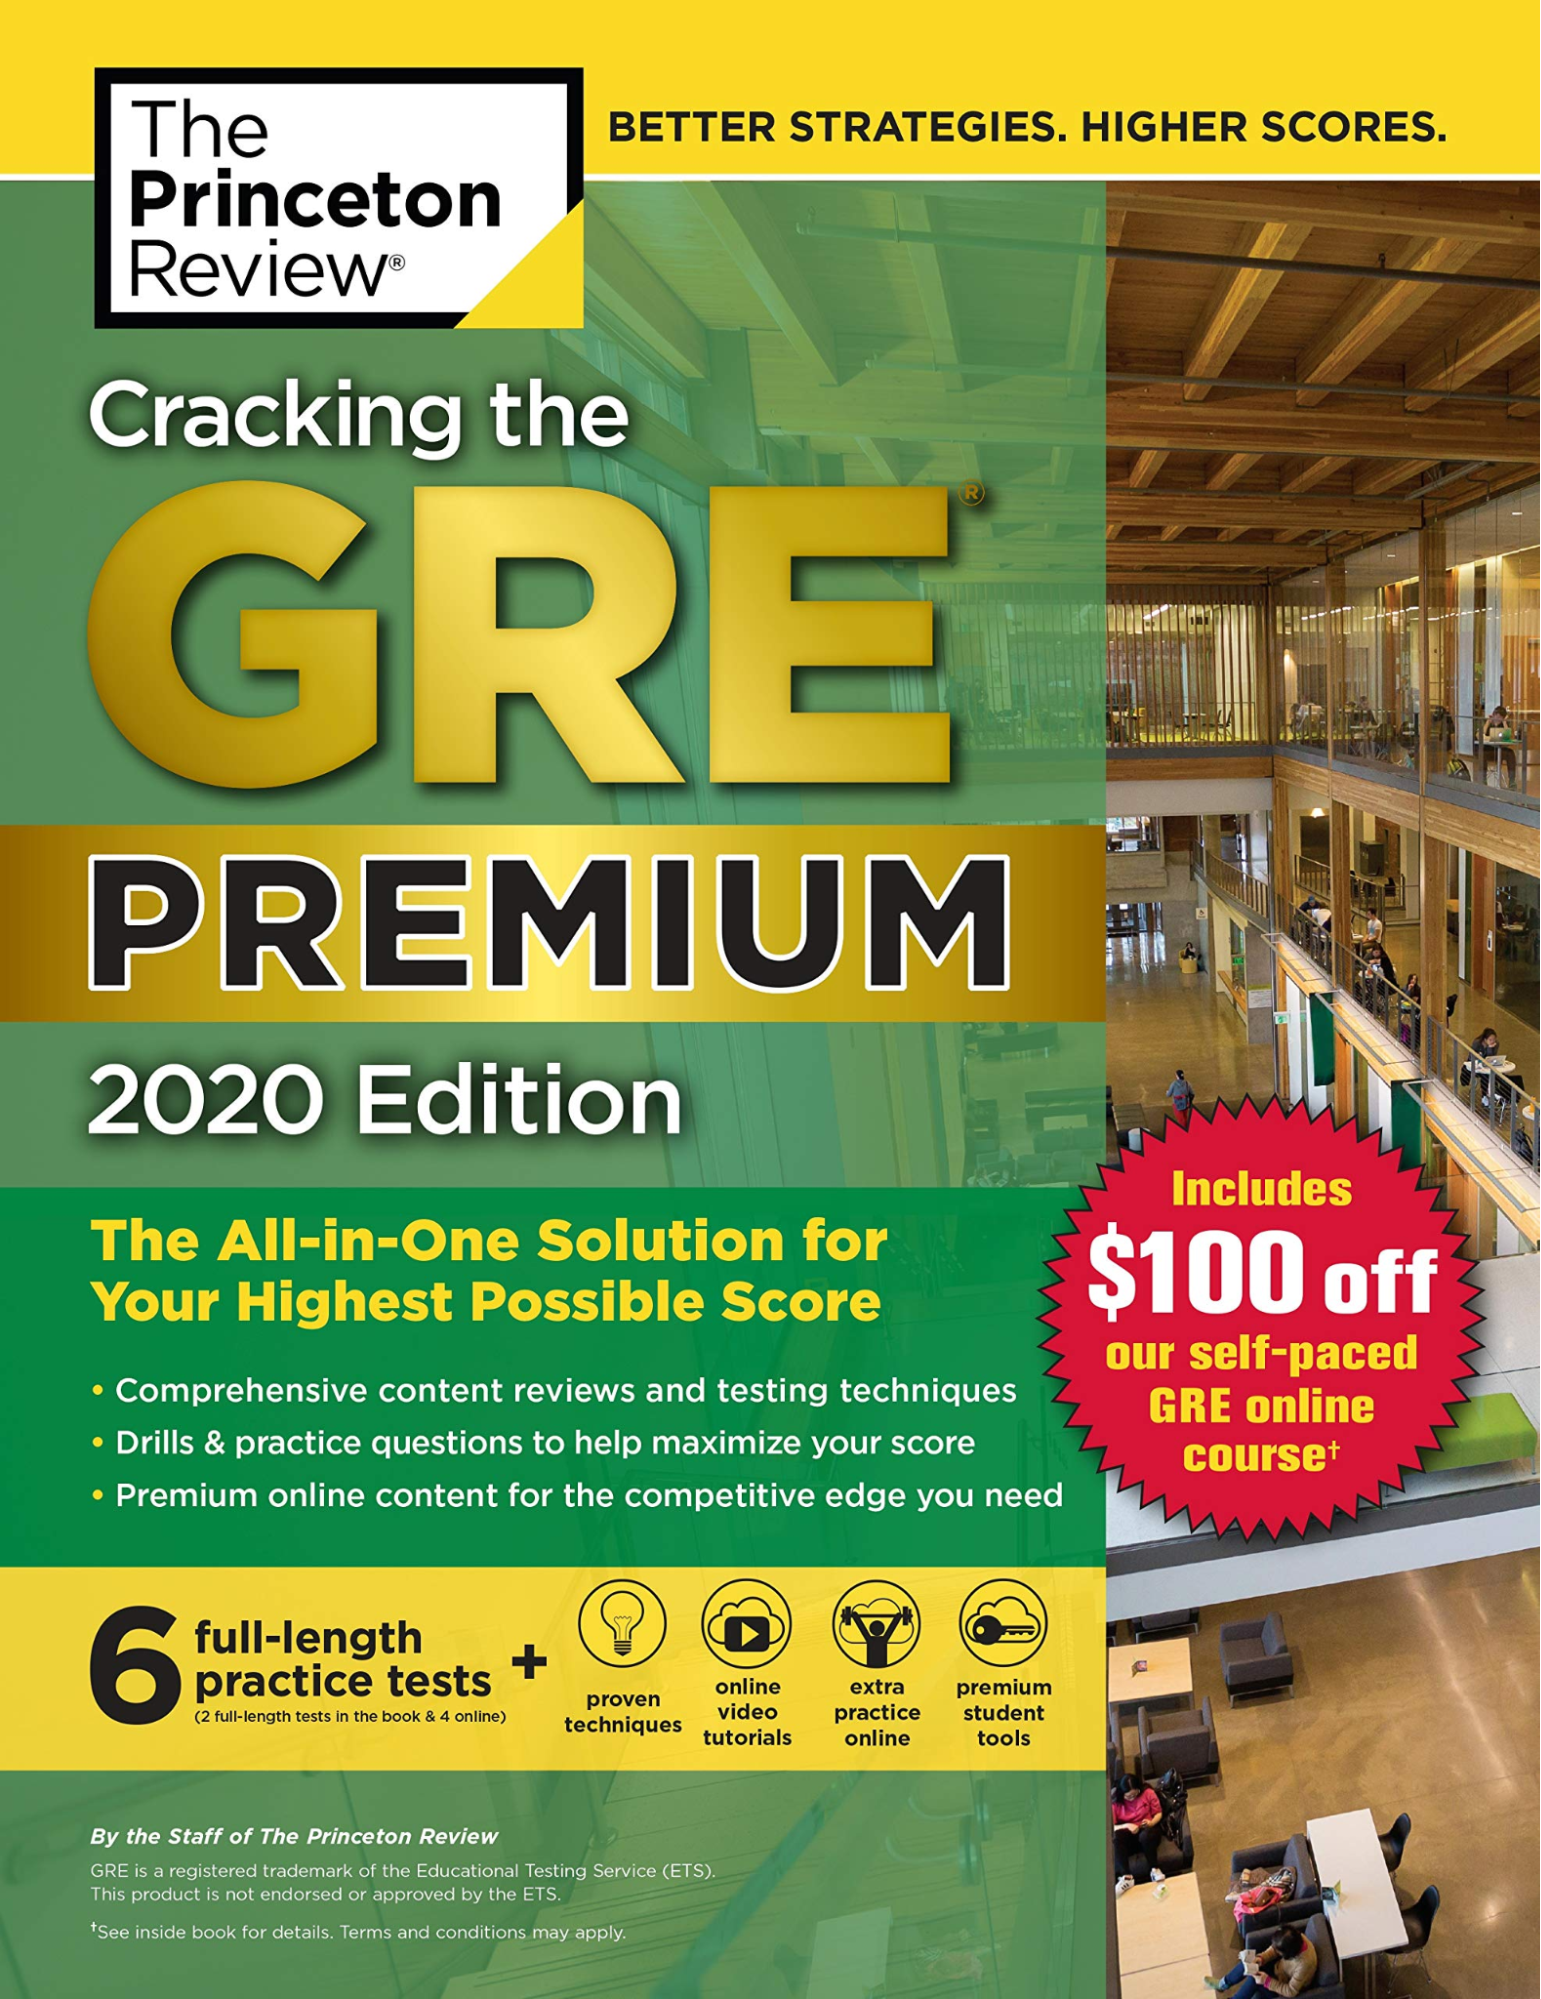 The Princeton Review Cracking the GRE Premium